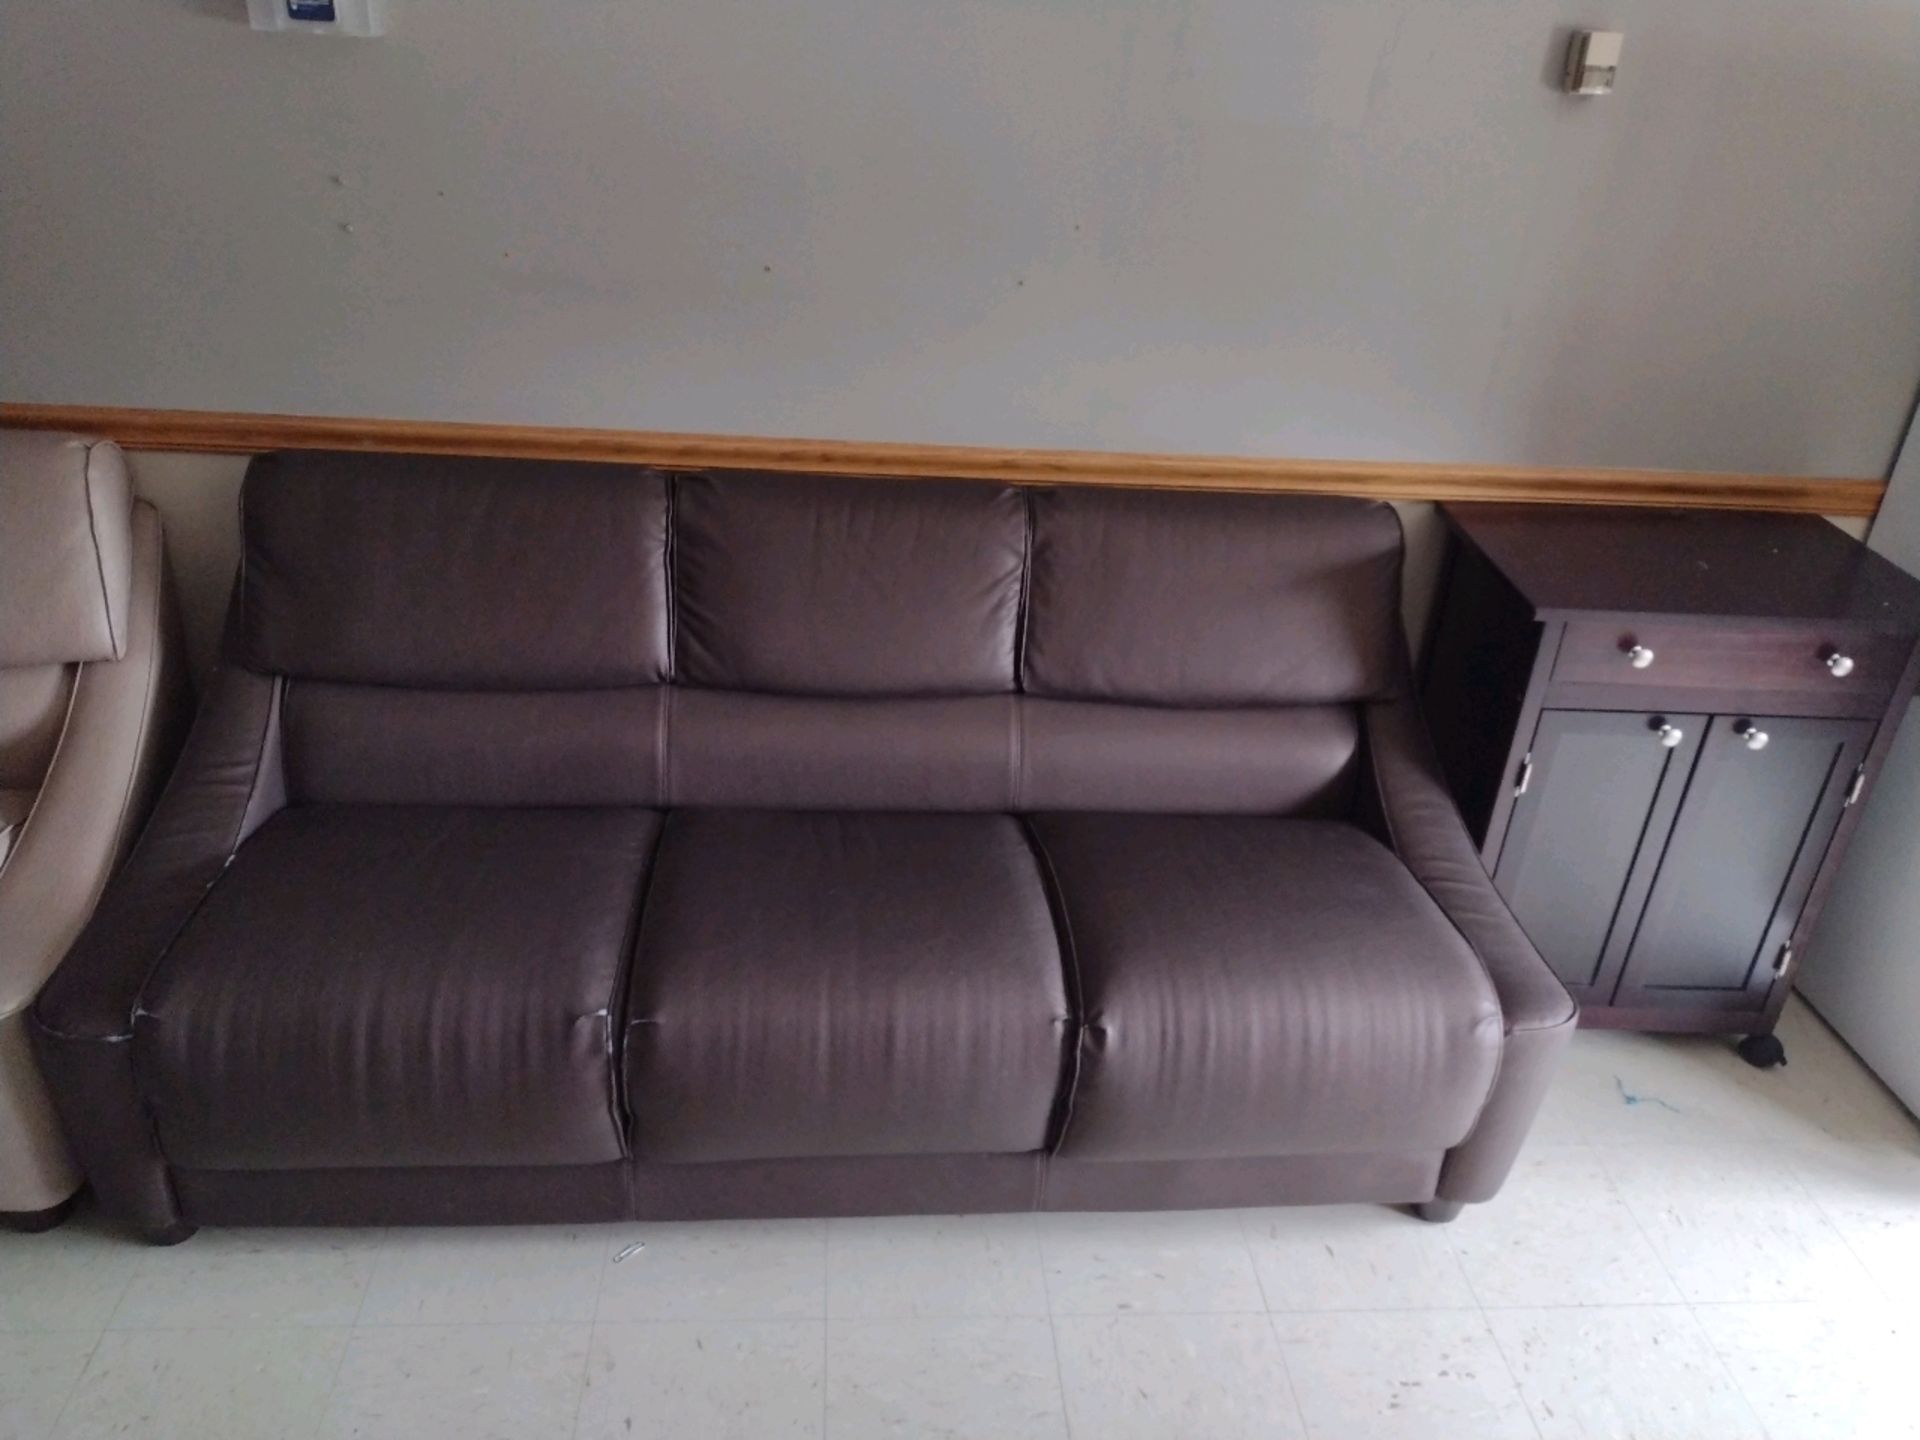 STAFF LOUNGE TO INCLUDE: DESK, TWIN BED, DINING TABLE, SOFA, REFRIGERATOR, 32" FLAT PANEL, PRINTER - Bild 6 aus 7